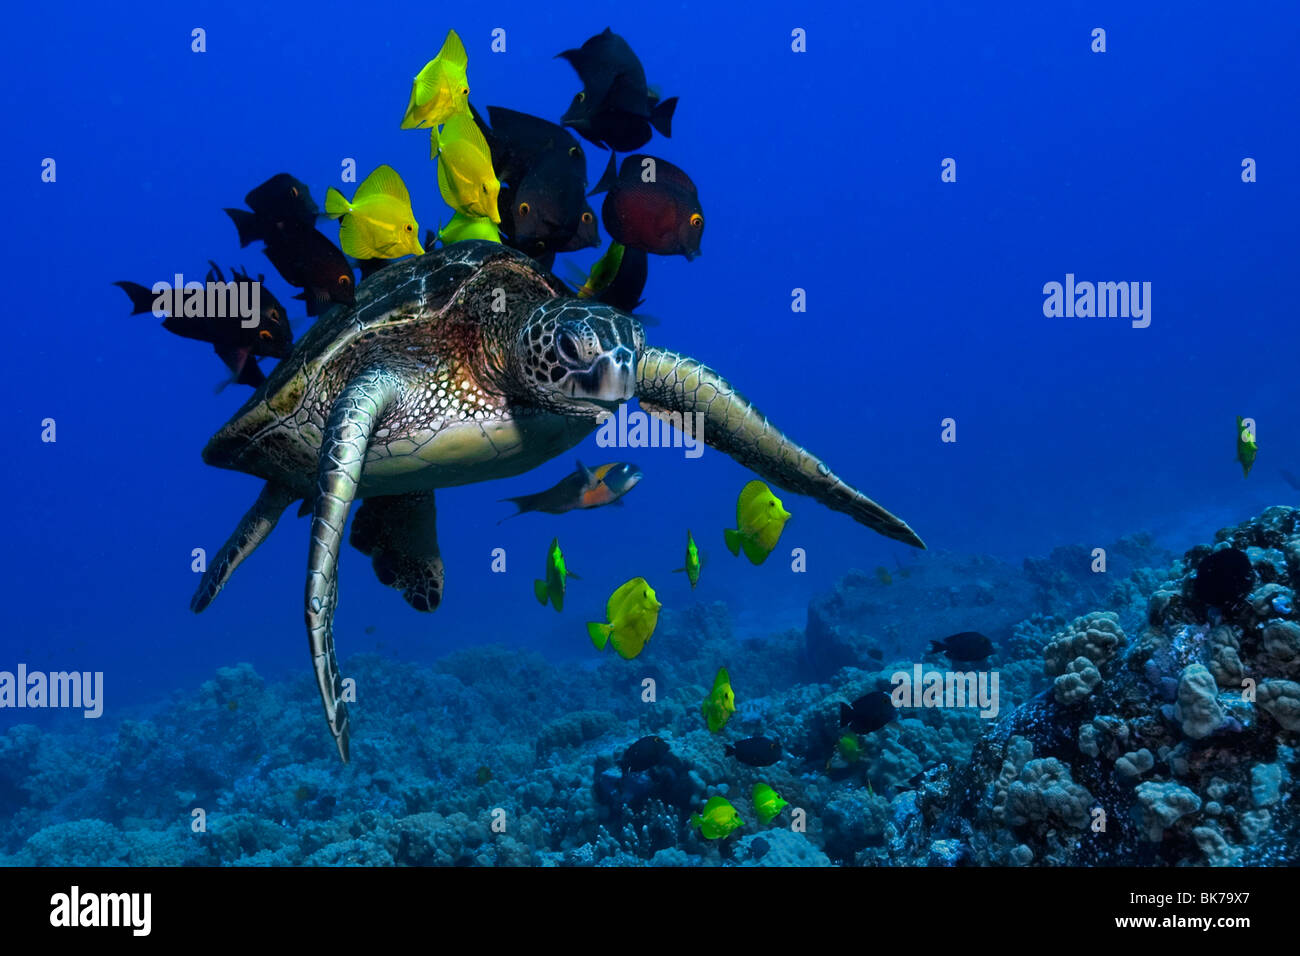 Diver observes as Green sea turtle, Chelonia mydas, gets cleaned by reef fish, Kona, Hawaii Stock Photo